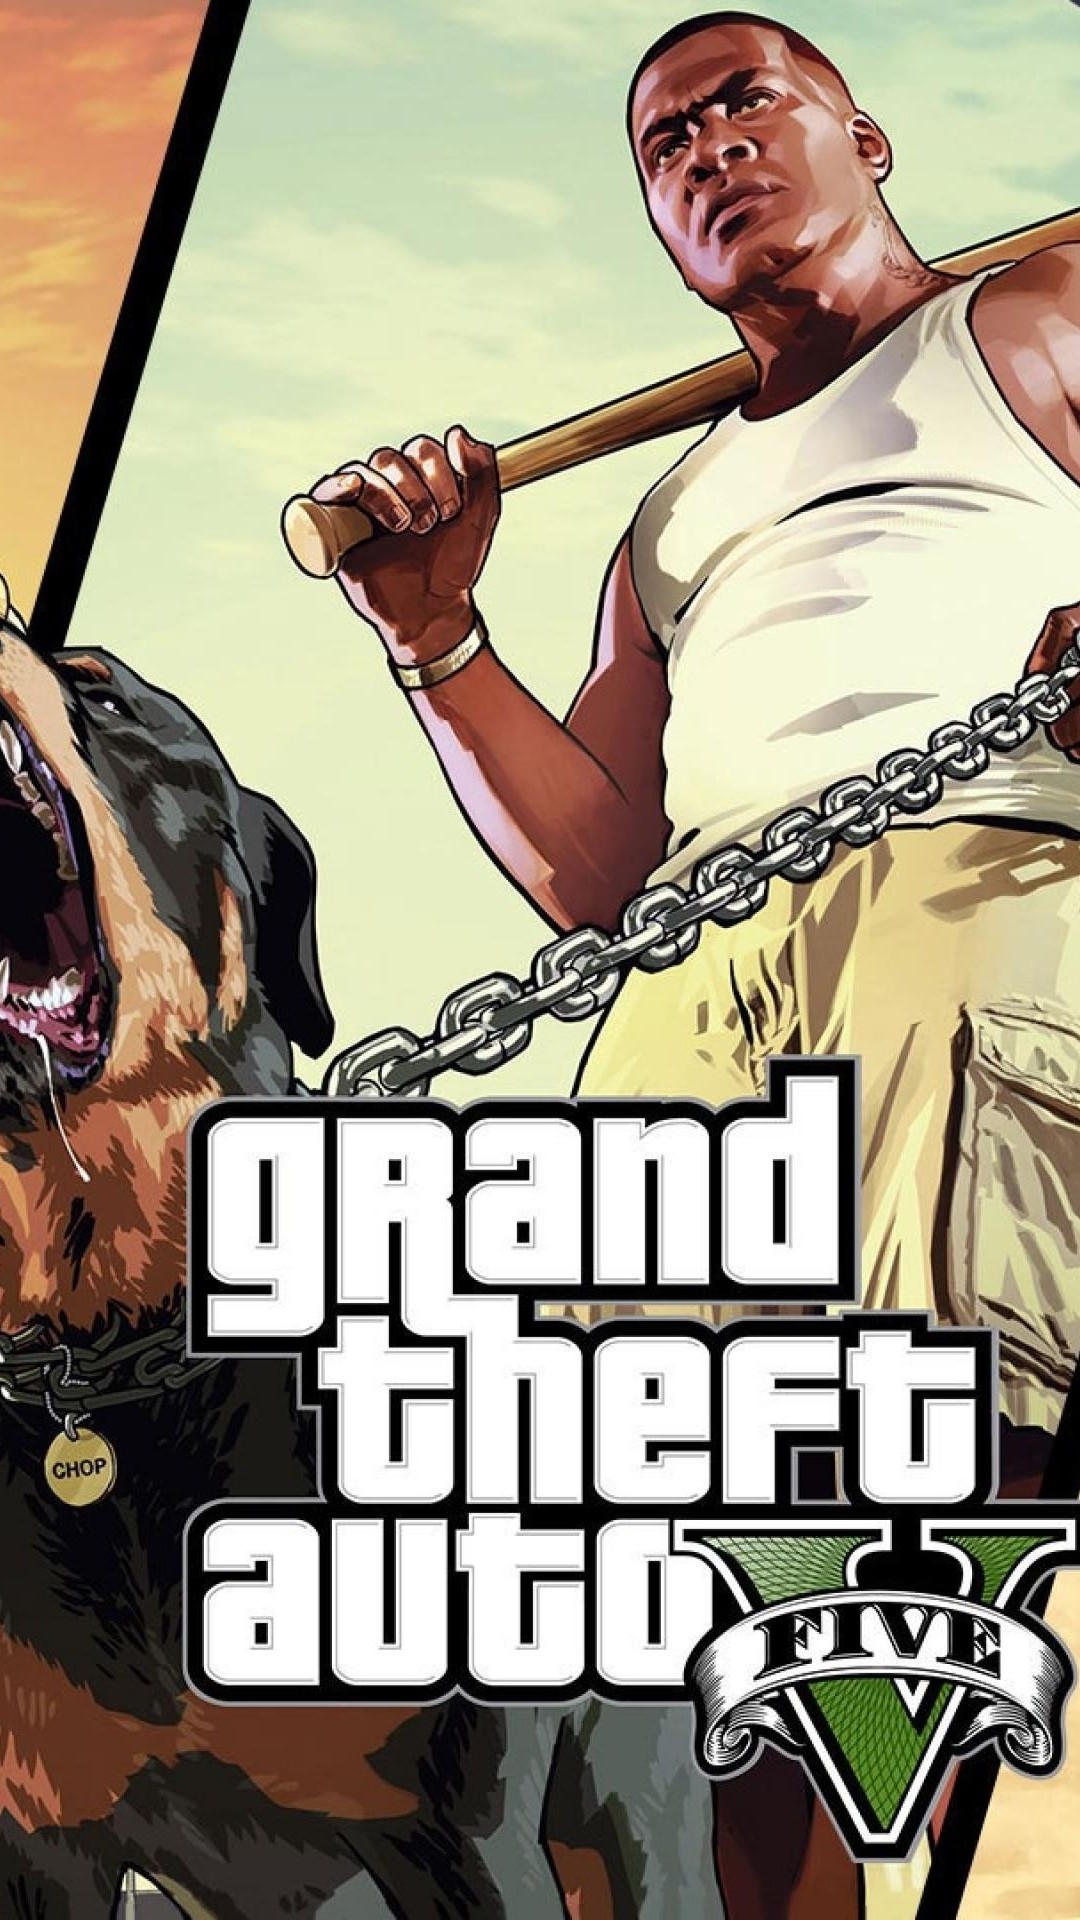 1080x1920 Search Results for “gta 5 wallpaper note – Adorable Wallpapers